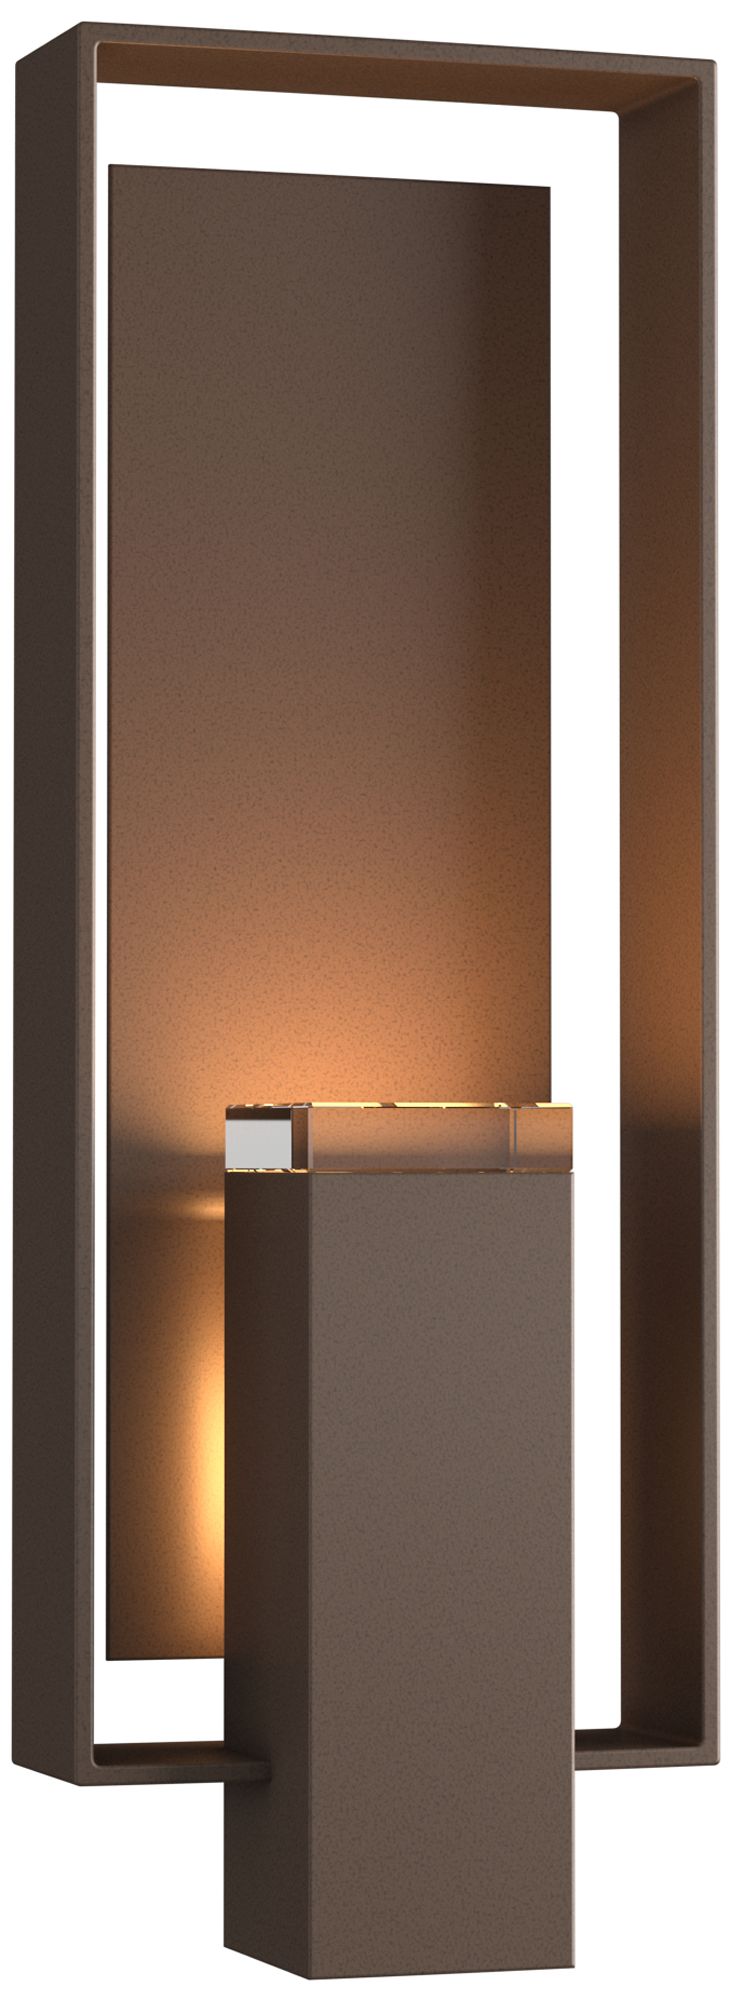 Shadow Box Large Outdoor Sconce - Bronze - Bronze Accents - Clear Glass